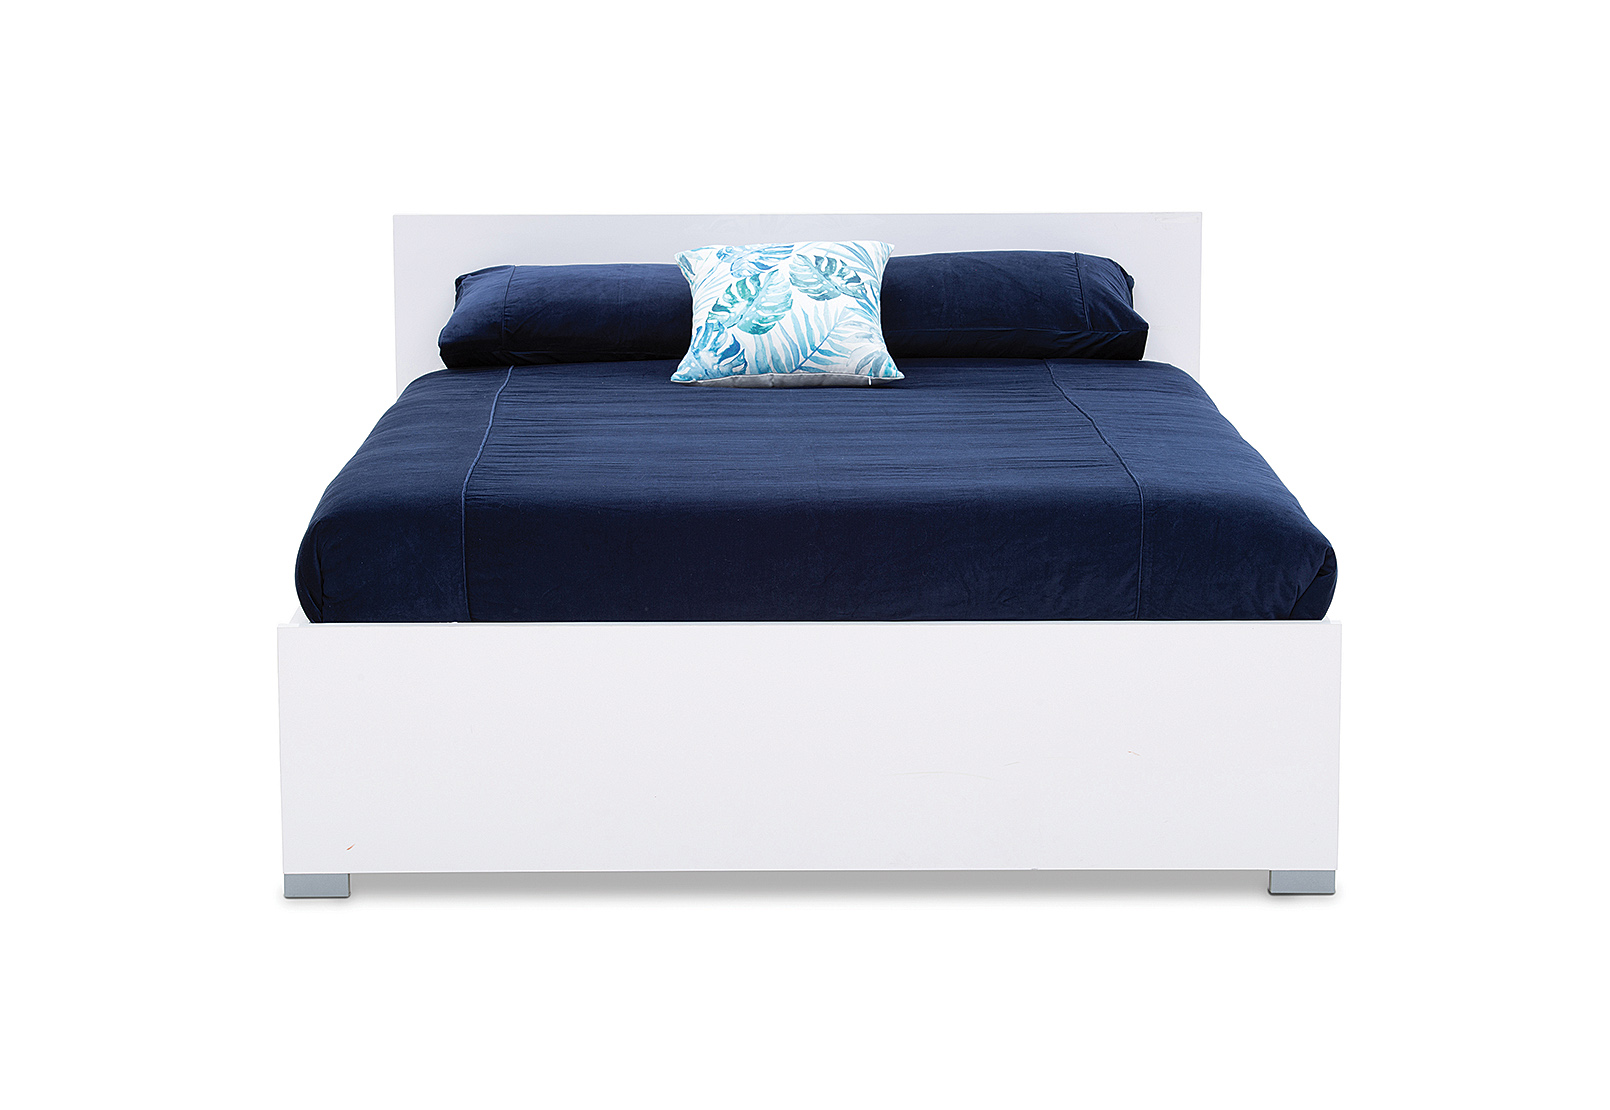 WHITE CASSIDY Queen Bed | Amart Furniture